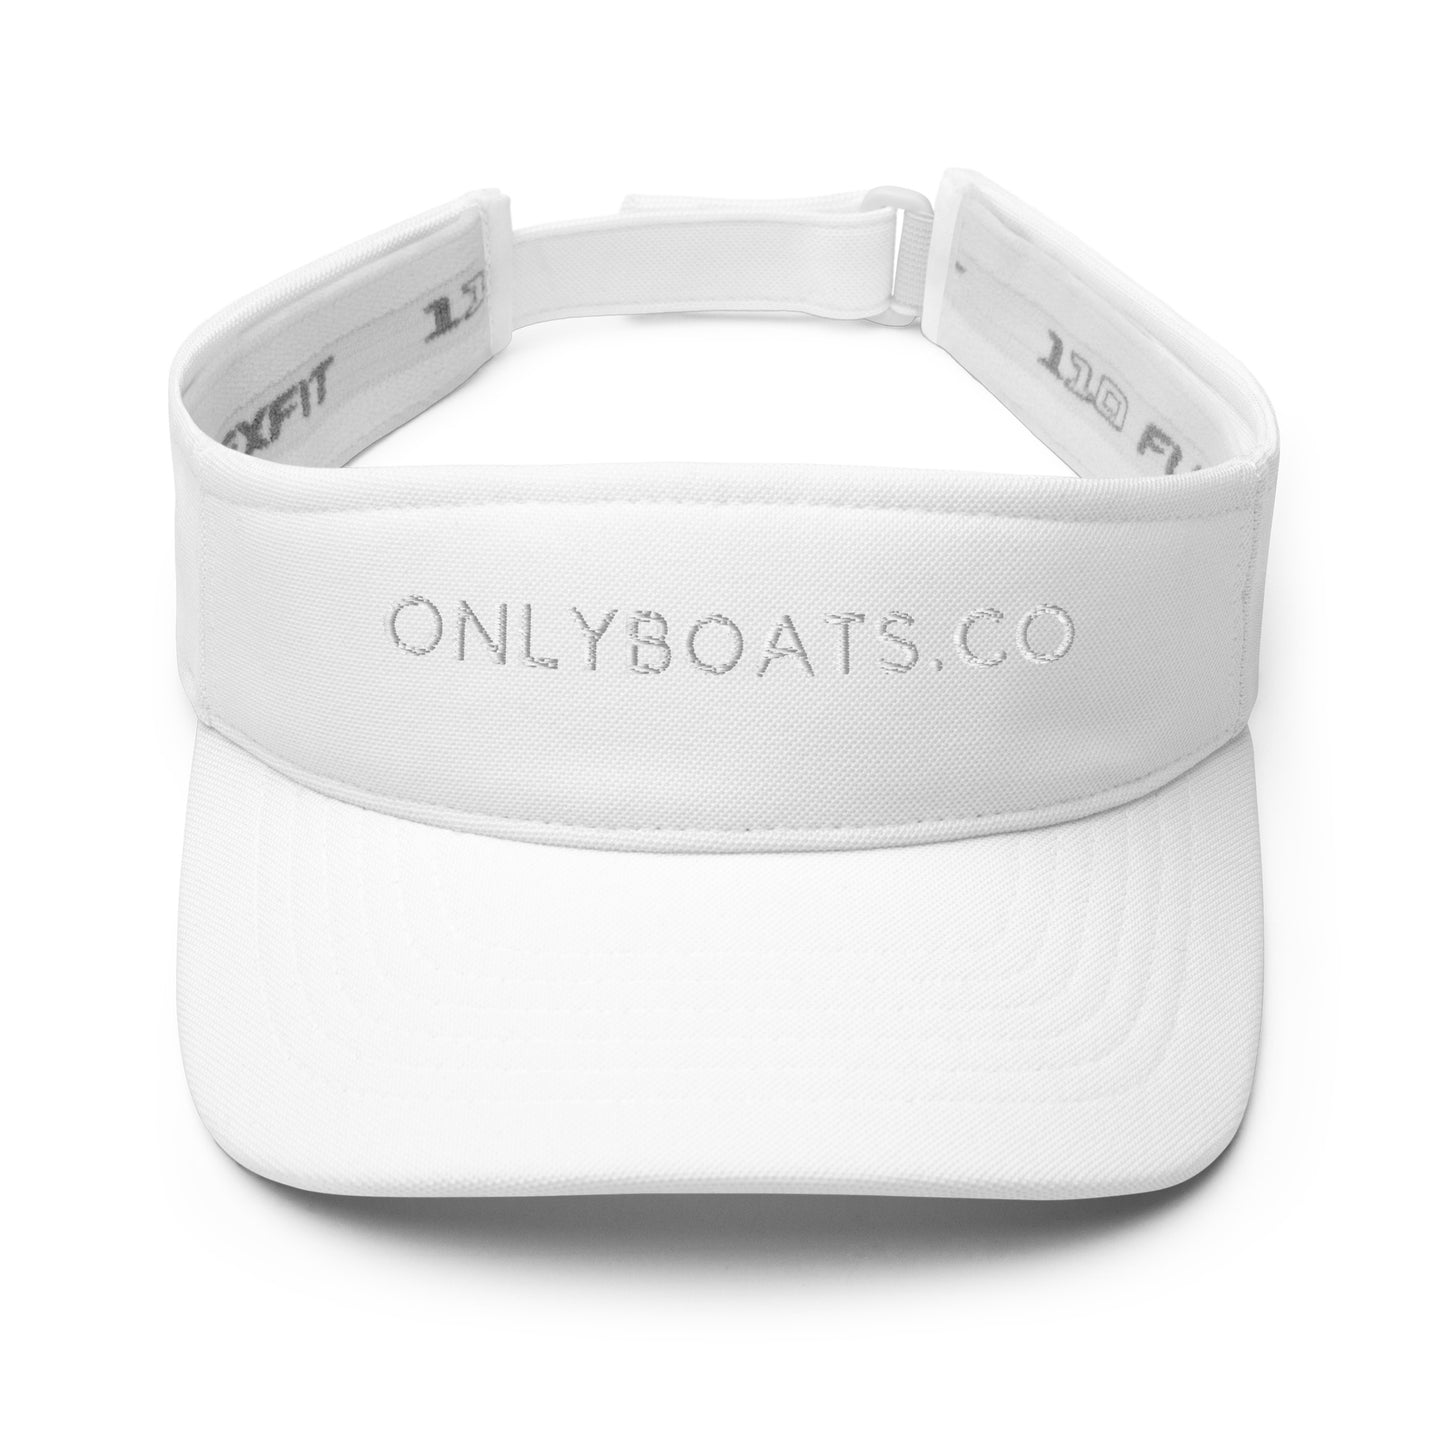 Onlyboats.co Visor - ONLY BOATS